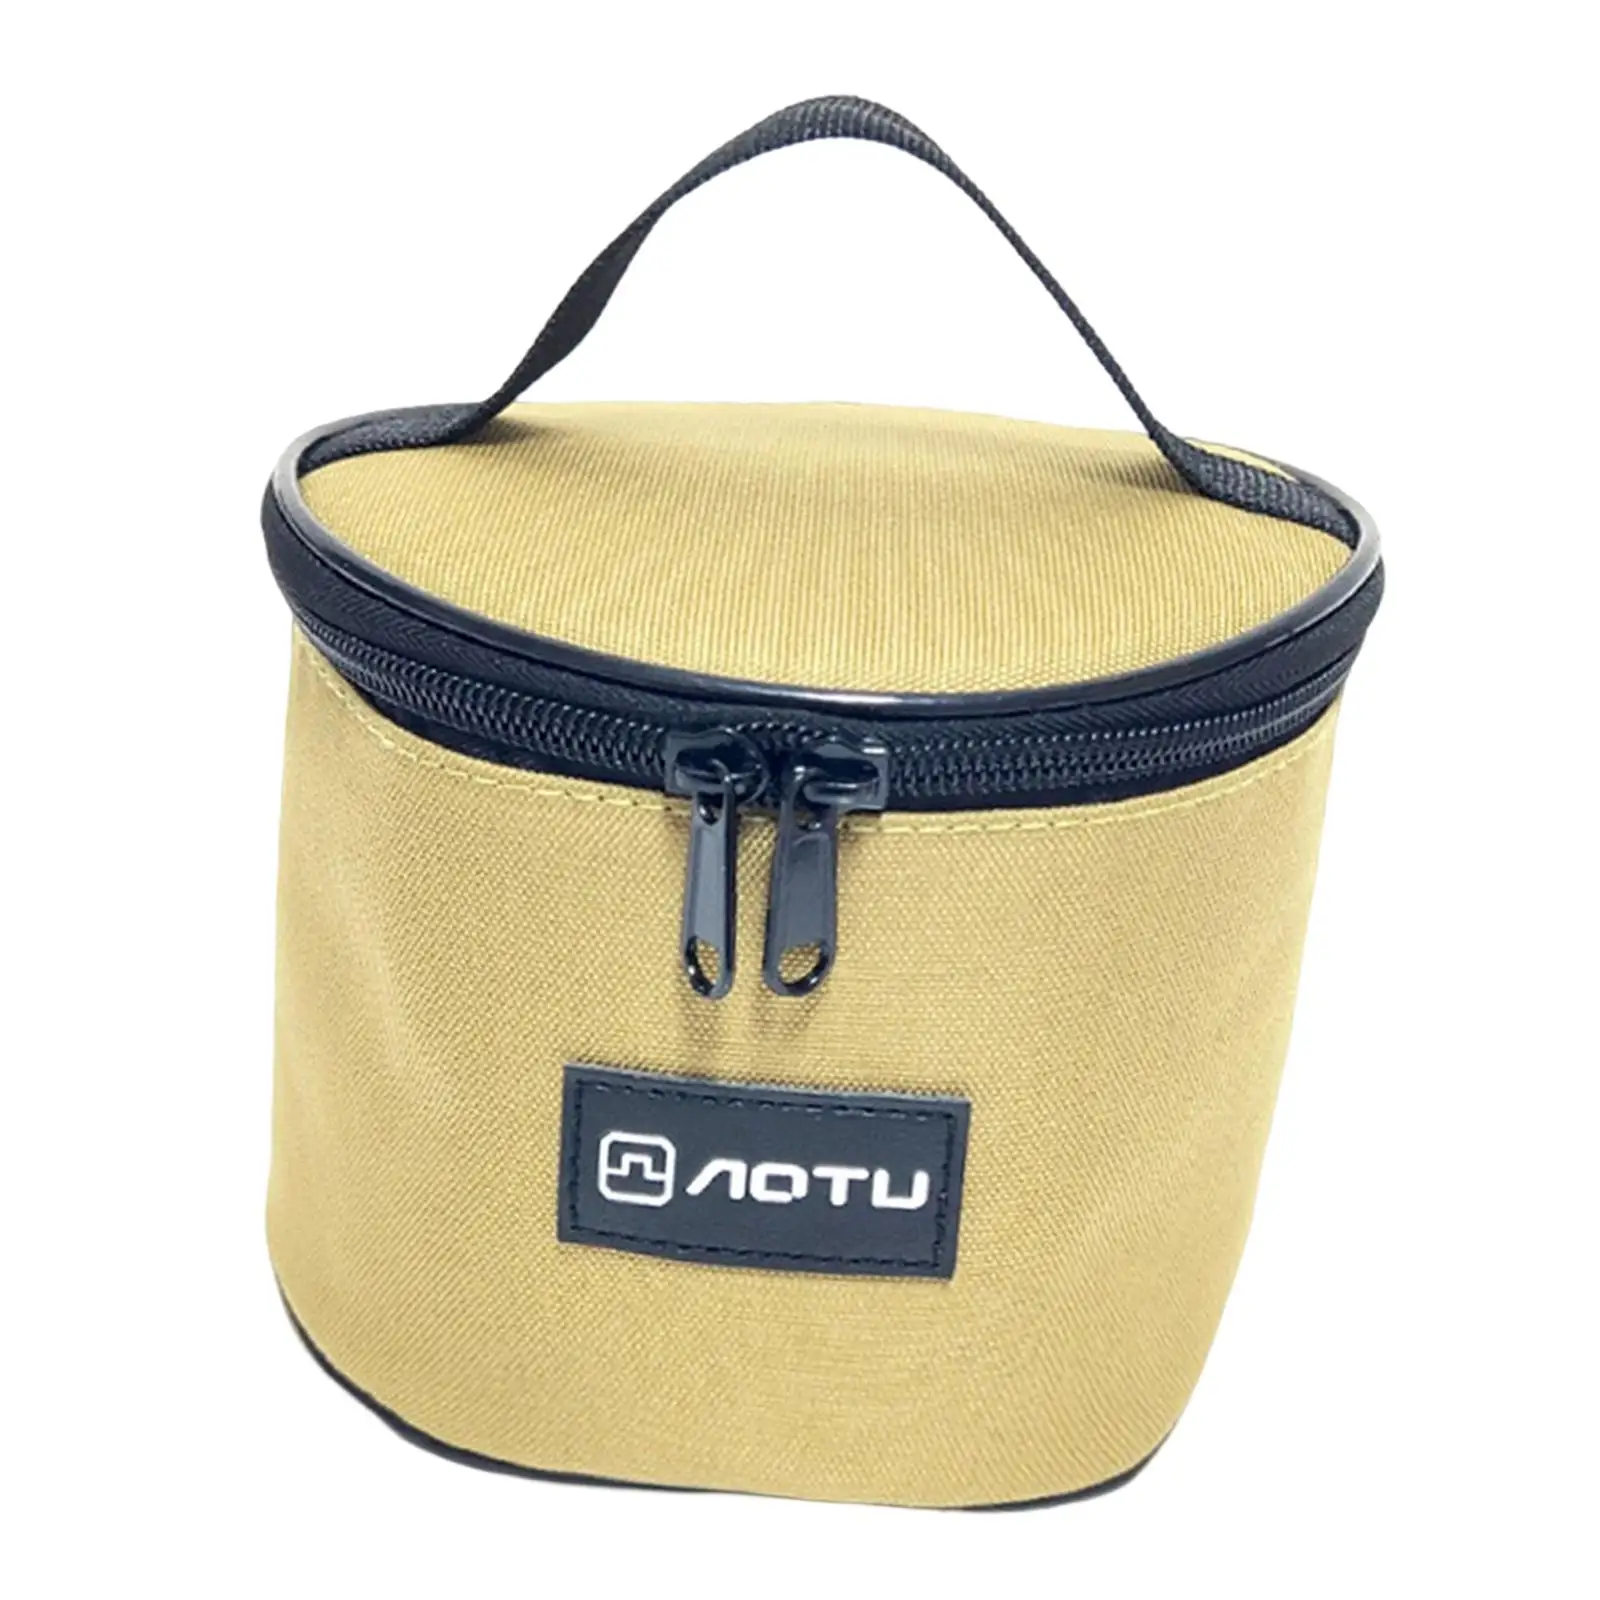 Oxford Bowl Storage Bag, Carry Case, with Handle Activities, Hiking, Accessories